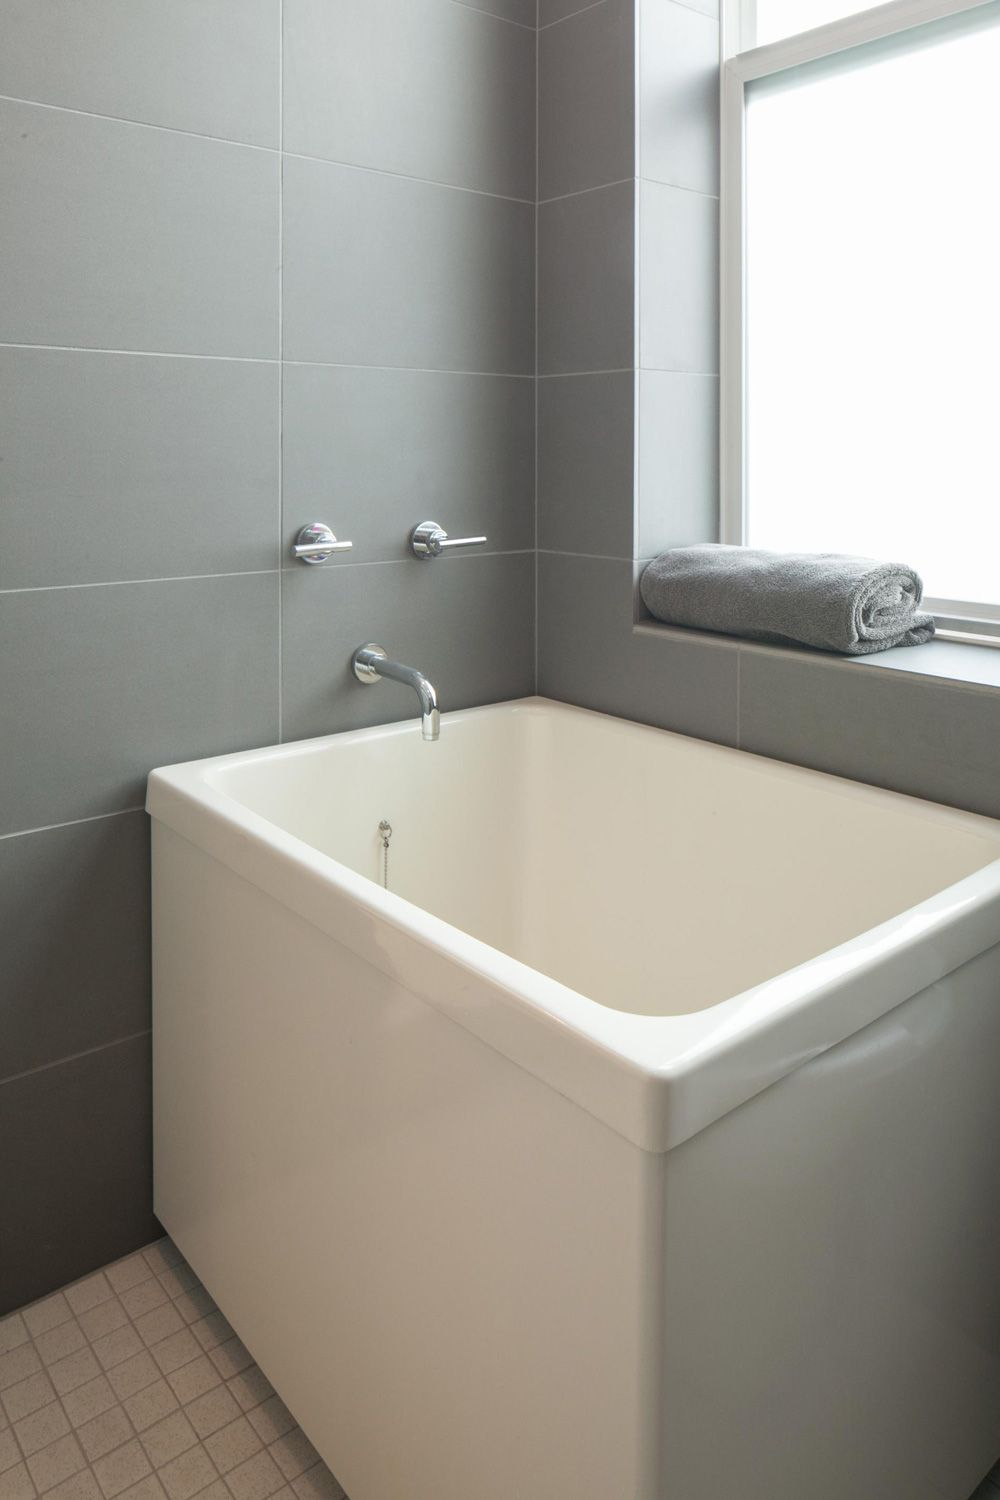 Japanese Soaking Tub Ofuro Tub Square With A Built In Seat Takes intended for dimensions 1000 X 1500